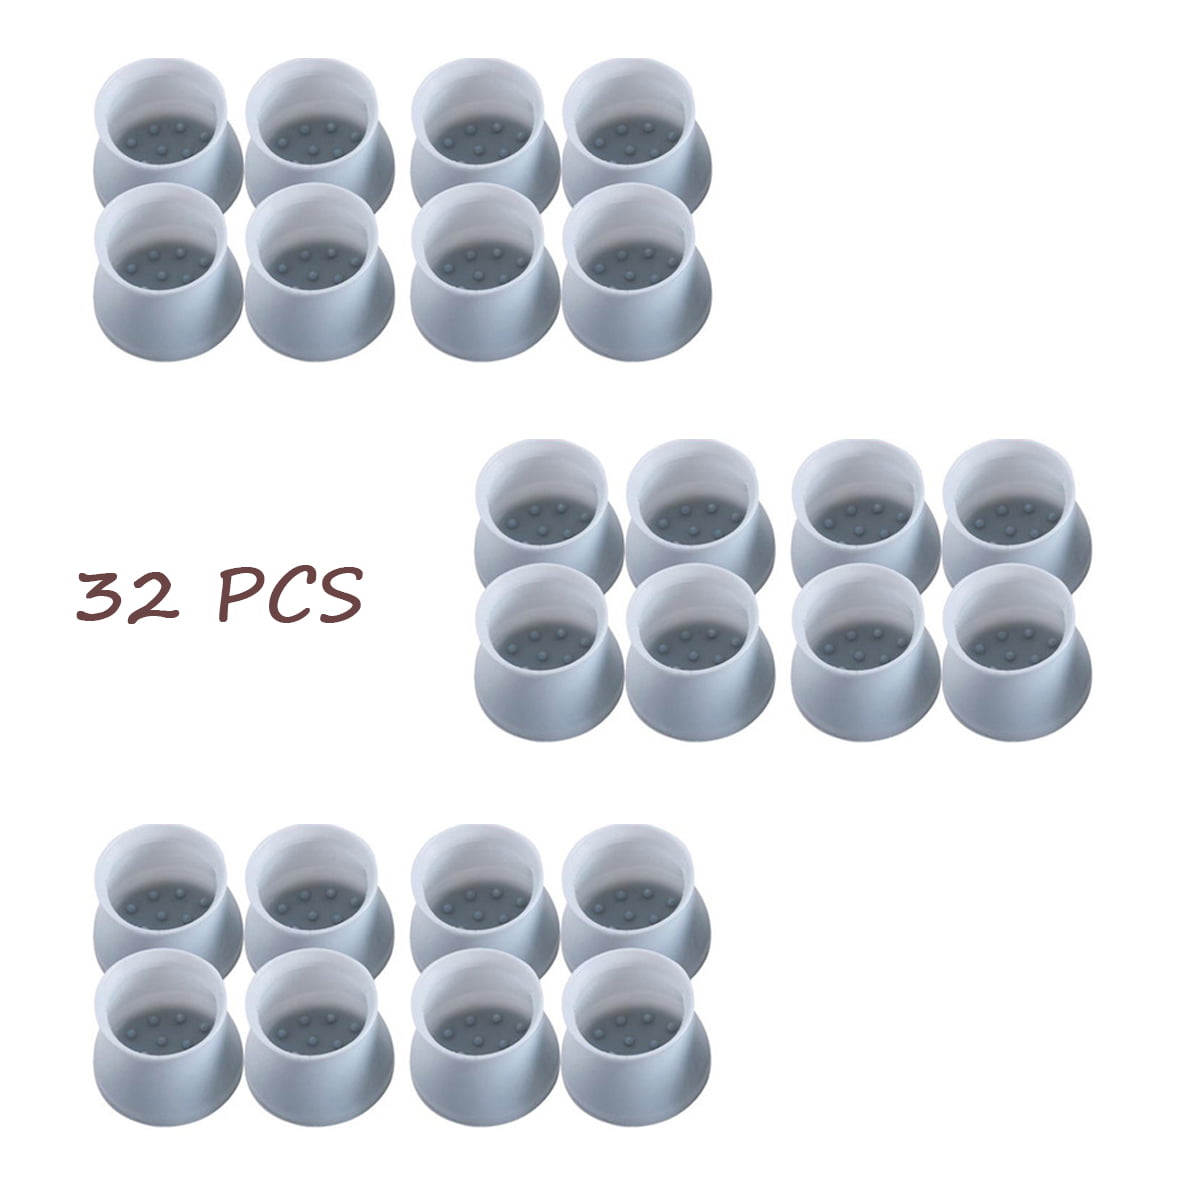 Details about   32PCS Square Silicone Chair Leg Cap Table Cover Feet Pads Floor Protectors